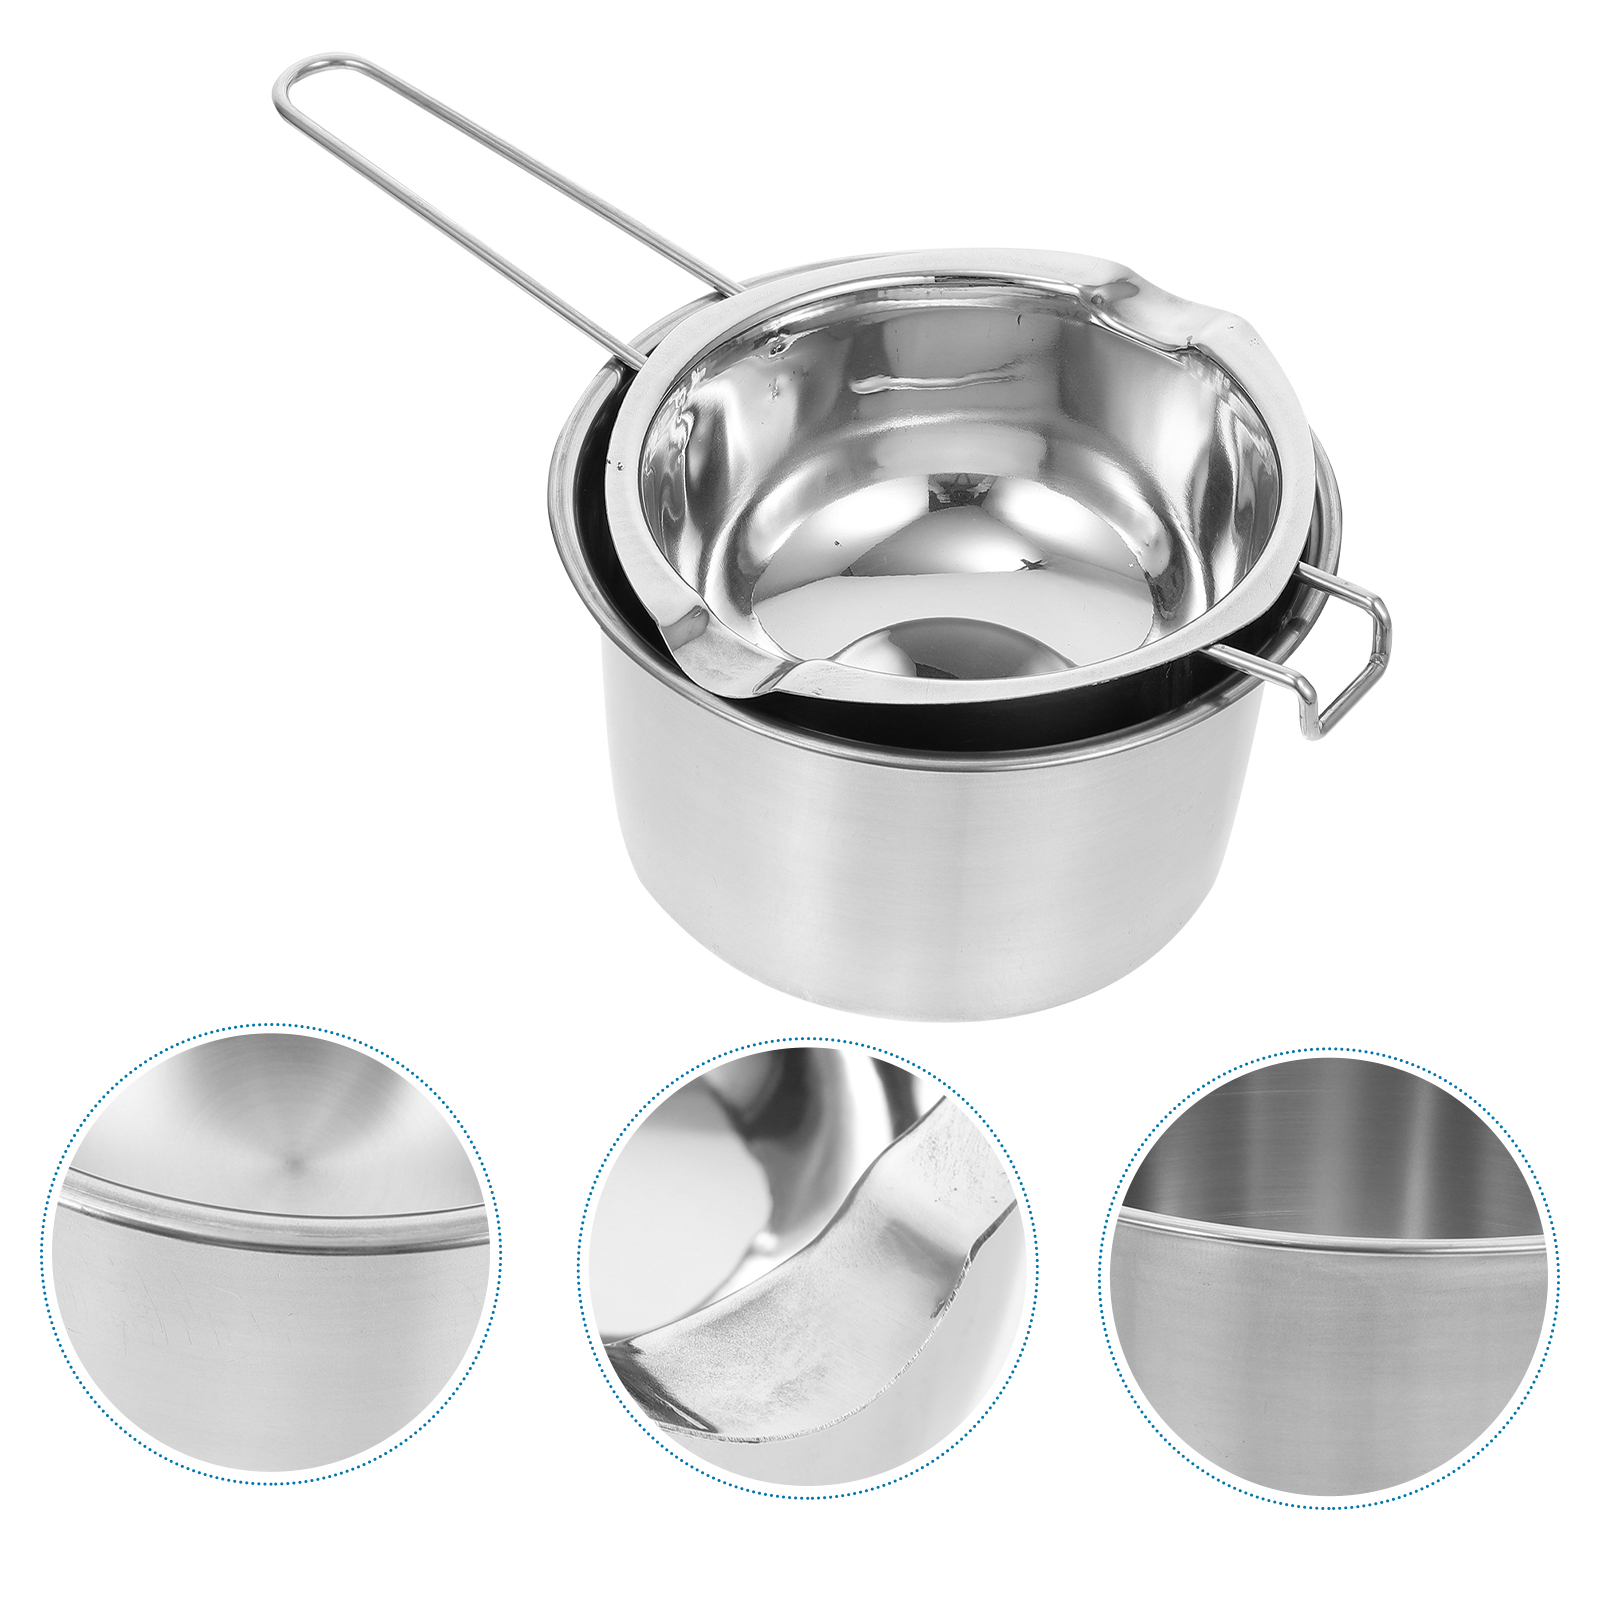 NUOLUX 1 Set Double Boiler Pot Stainless Steel Chocolate Pot Chocolate Melting Pot - image 5 of 6